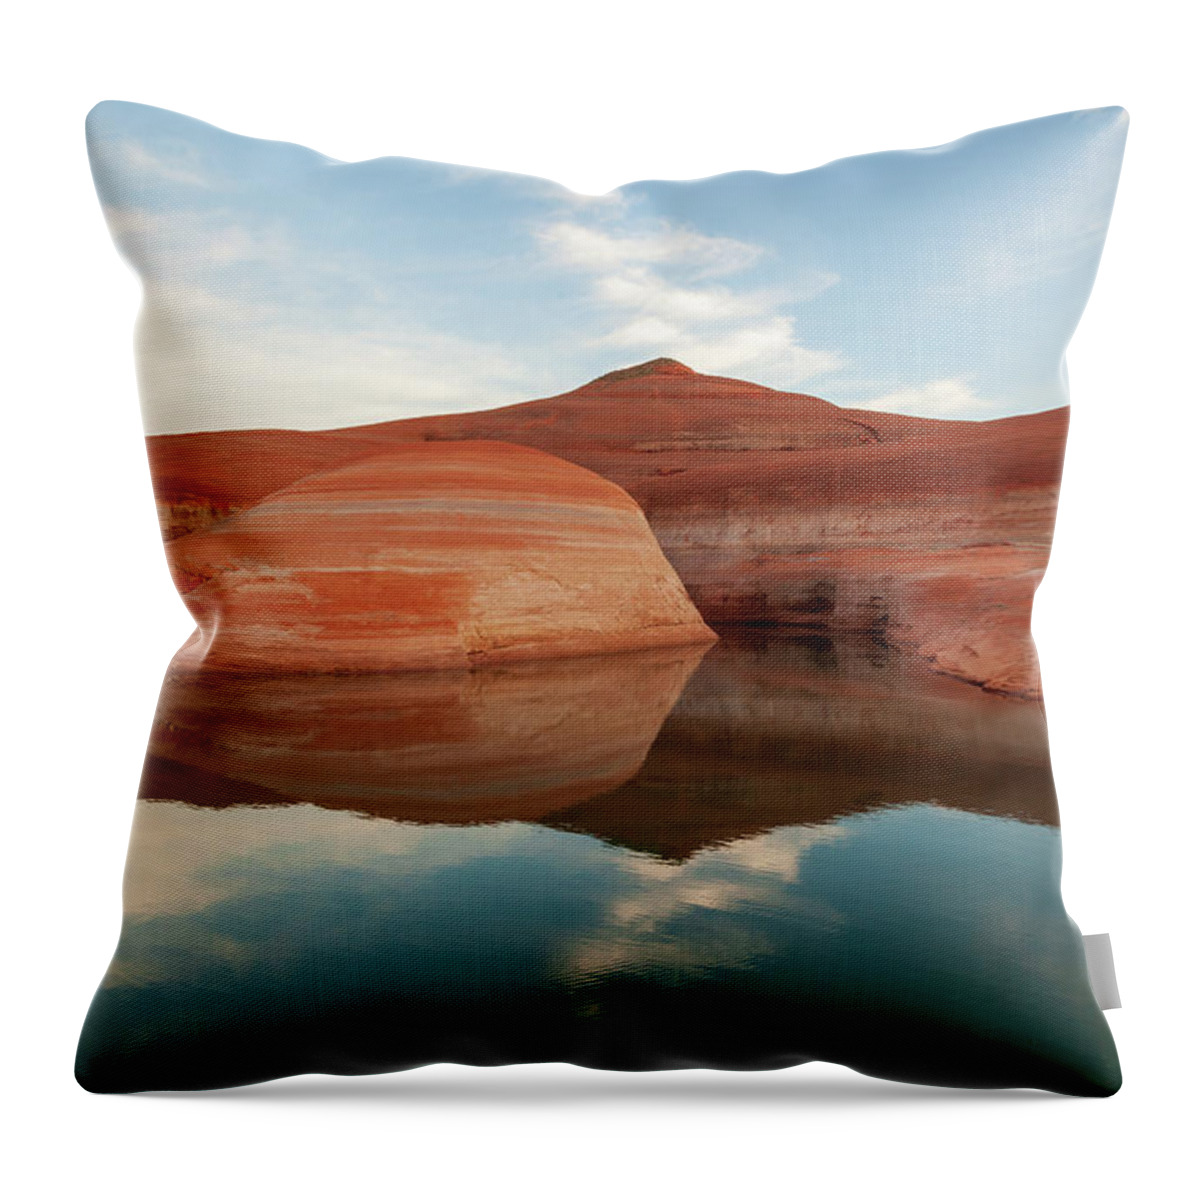 2019 Throw Pillow featuring the photograph Simple Powell Reflection by Bradley Morris